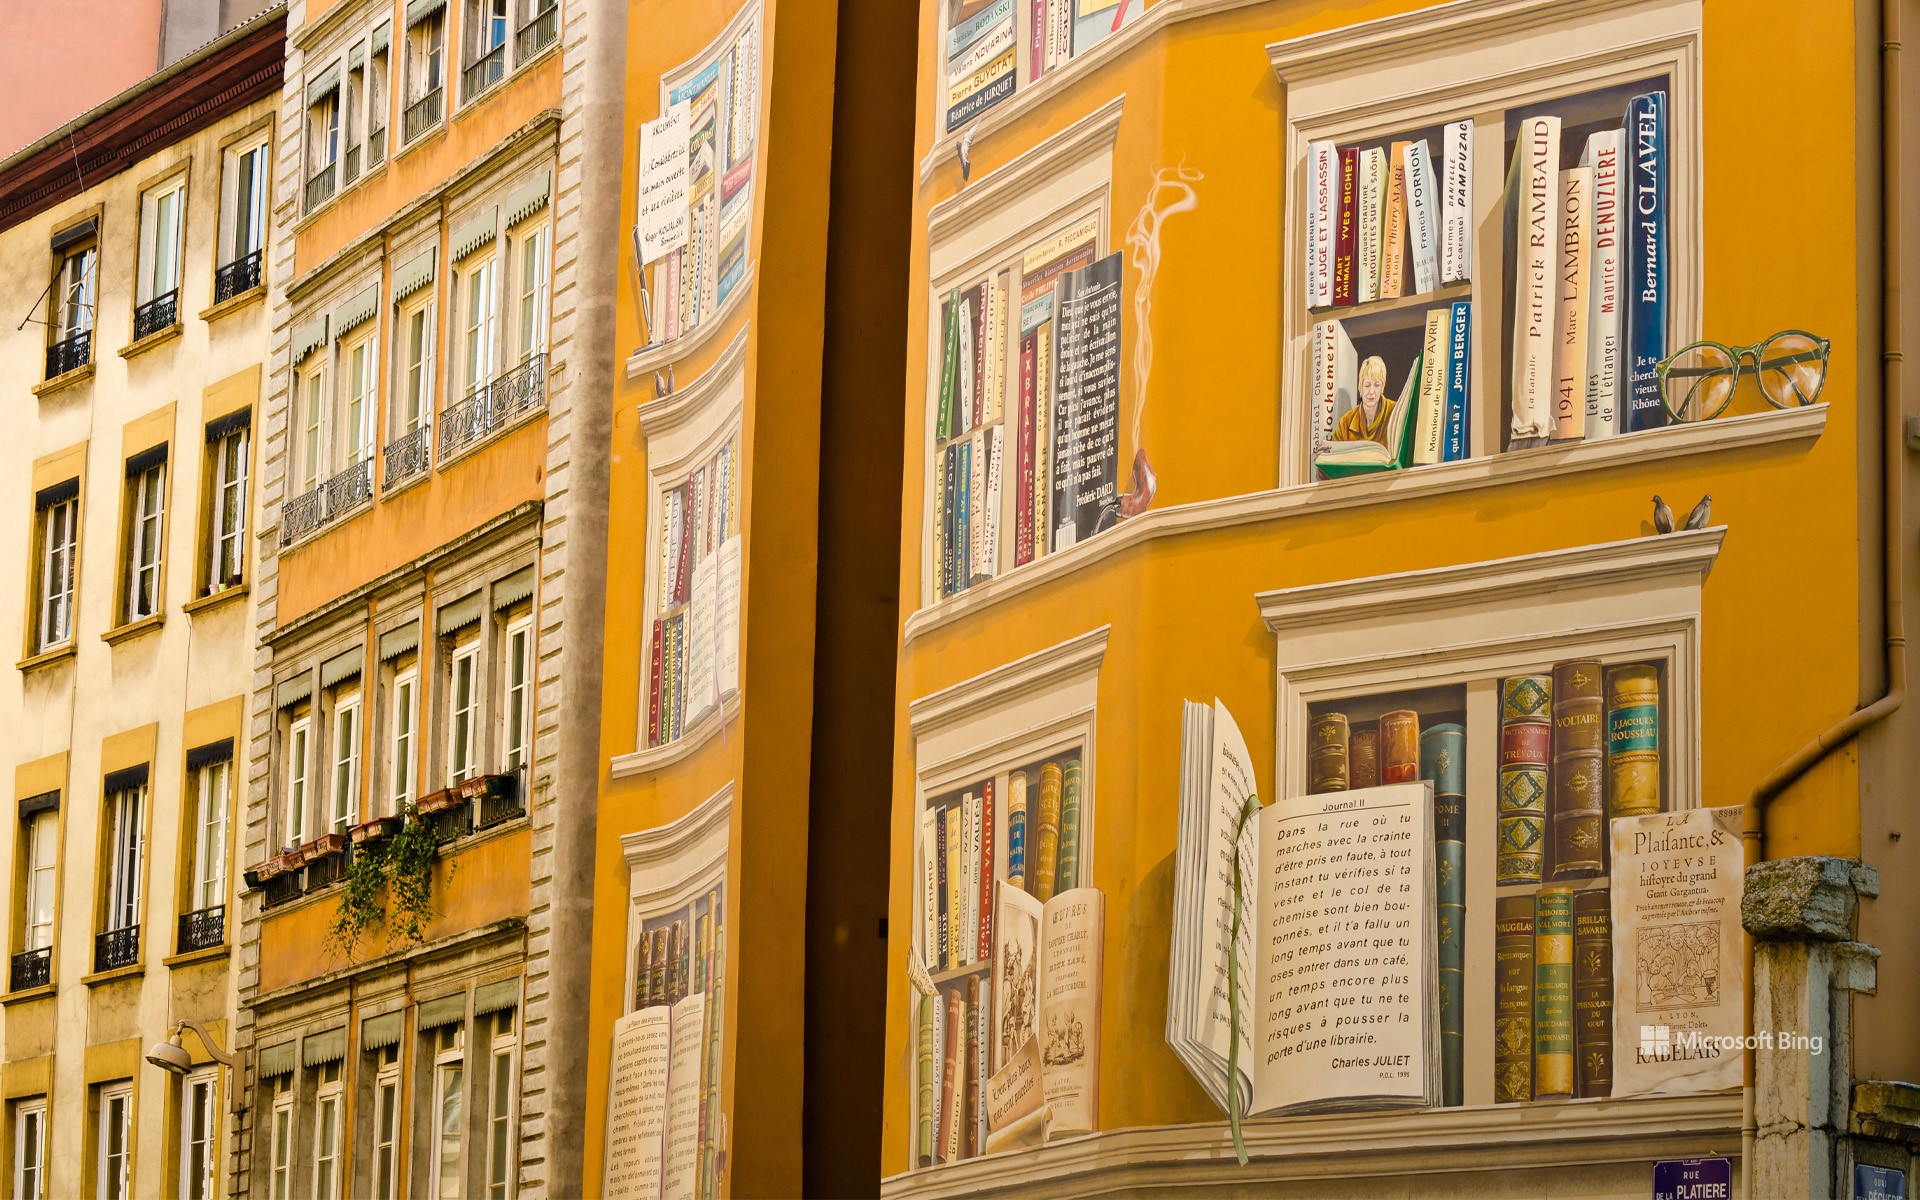 Painted wall of writers, Lyon, France